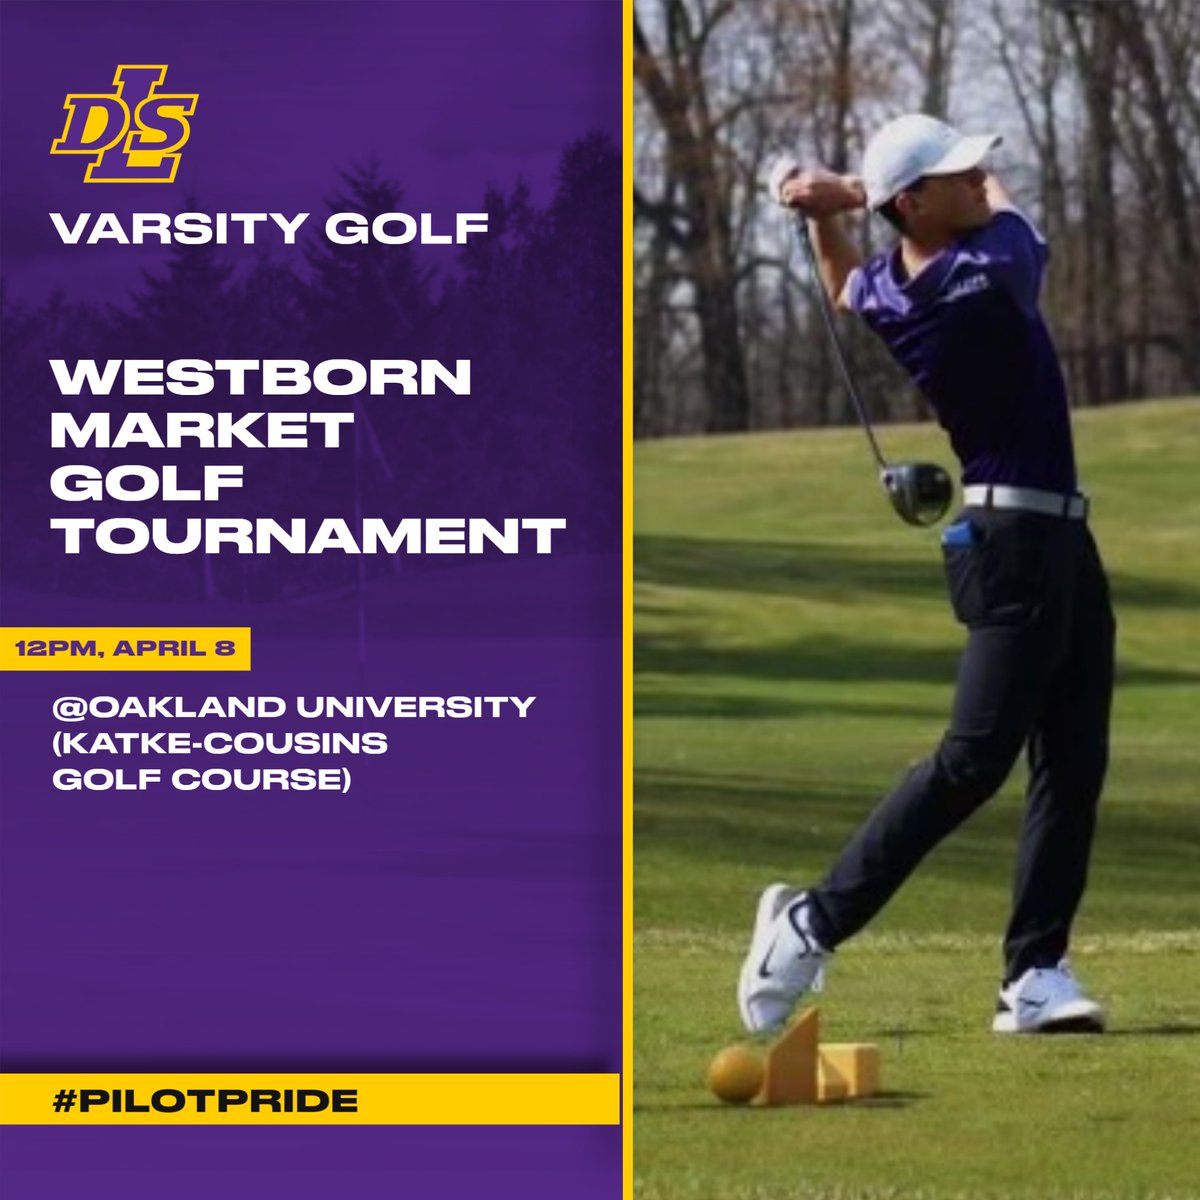 DLS Varsity Golf plays their first match of the season in the Westborn Market Golf Tournament at Oakland University (Katke-Cousins Golf Course) at 12PM, today. Each player will be provided with glasses for the solar eclipse. Let’s go, Pilots! #PilotPride